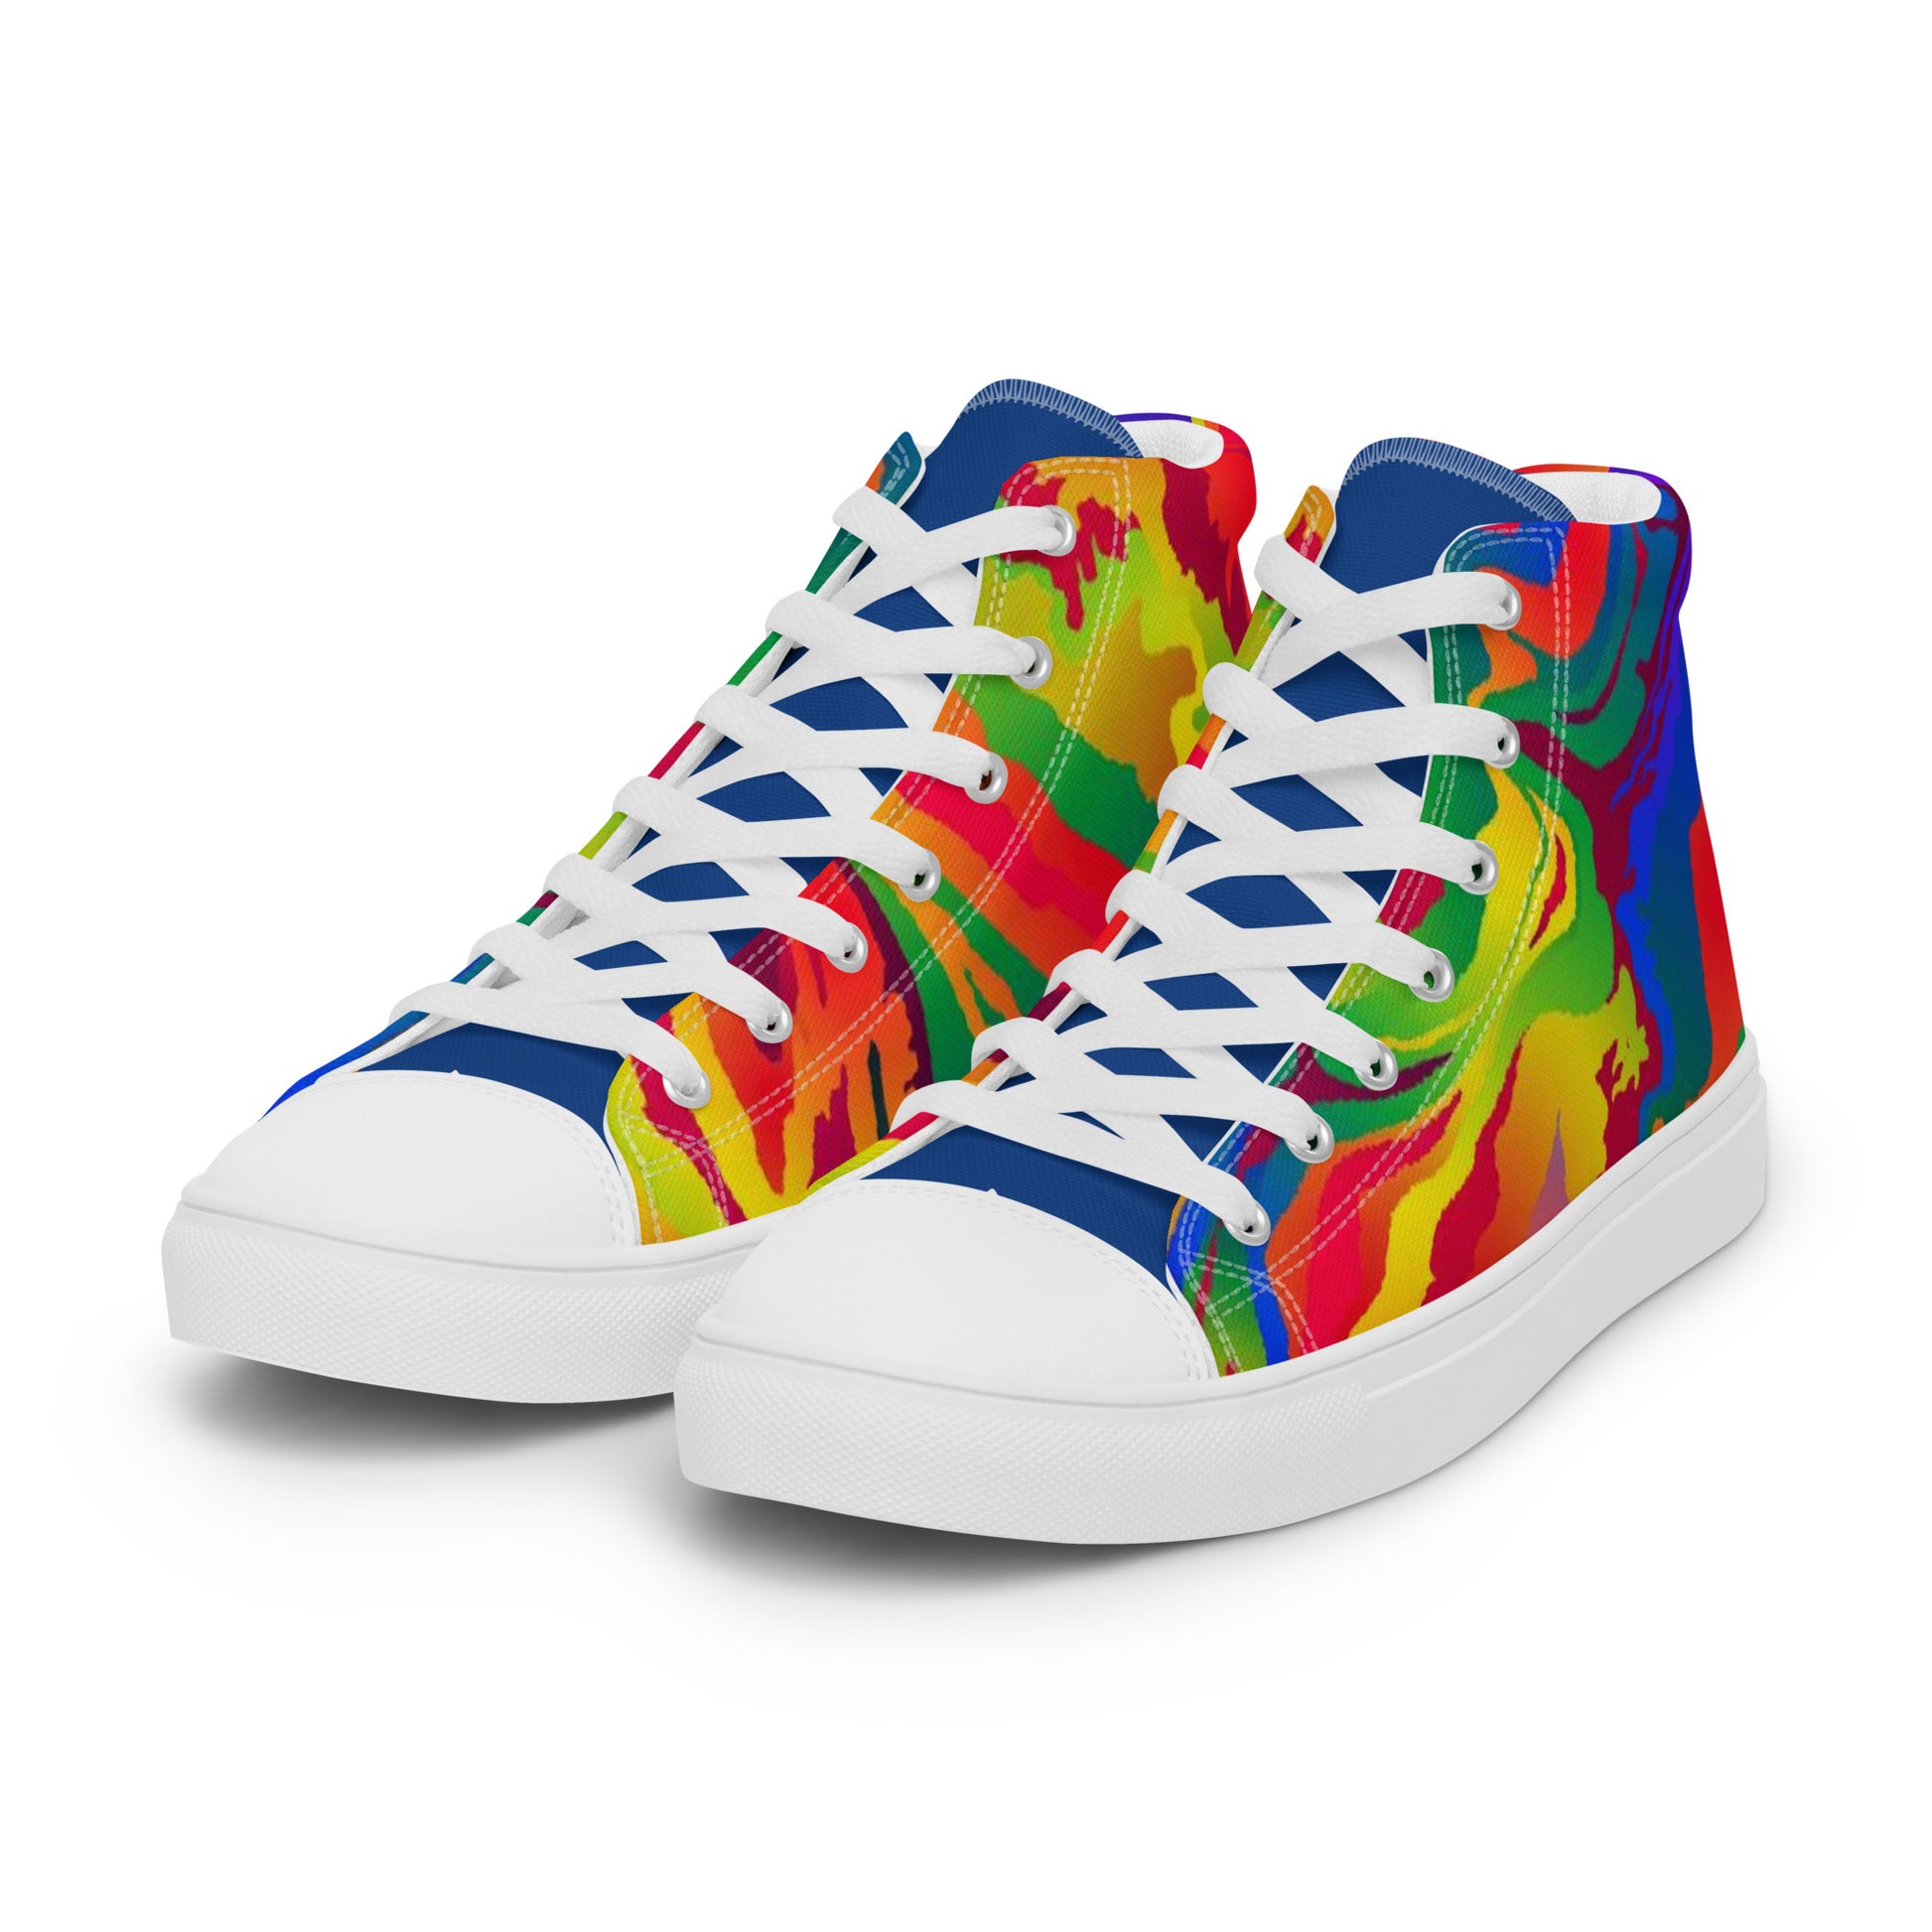 Abstract Men’s high top canvas shoes - O By Onica Online Store